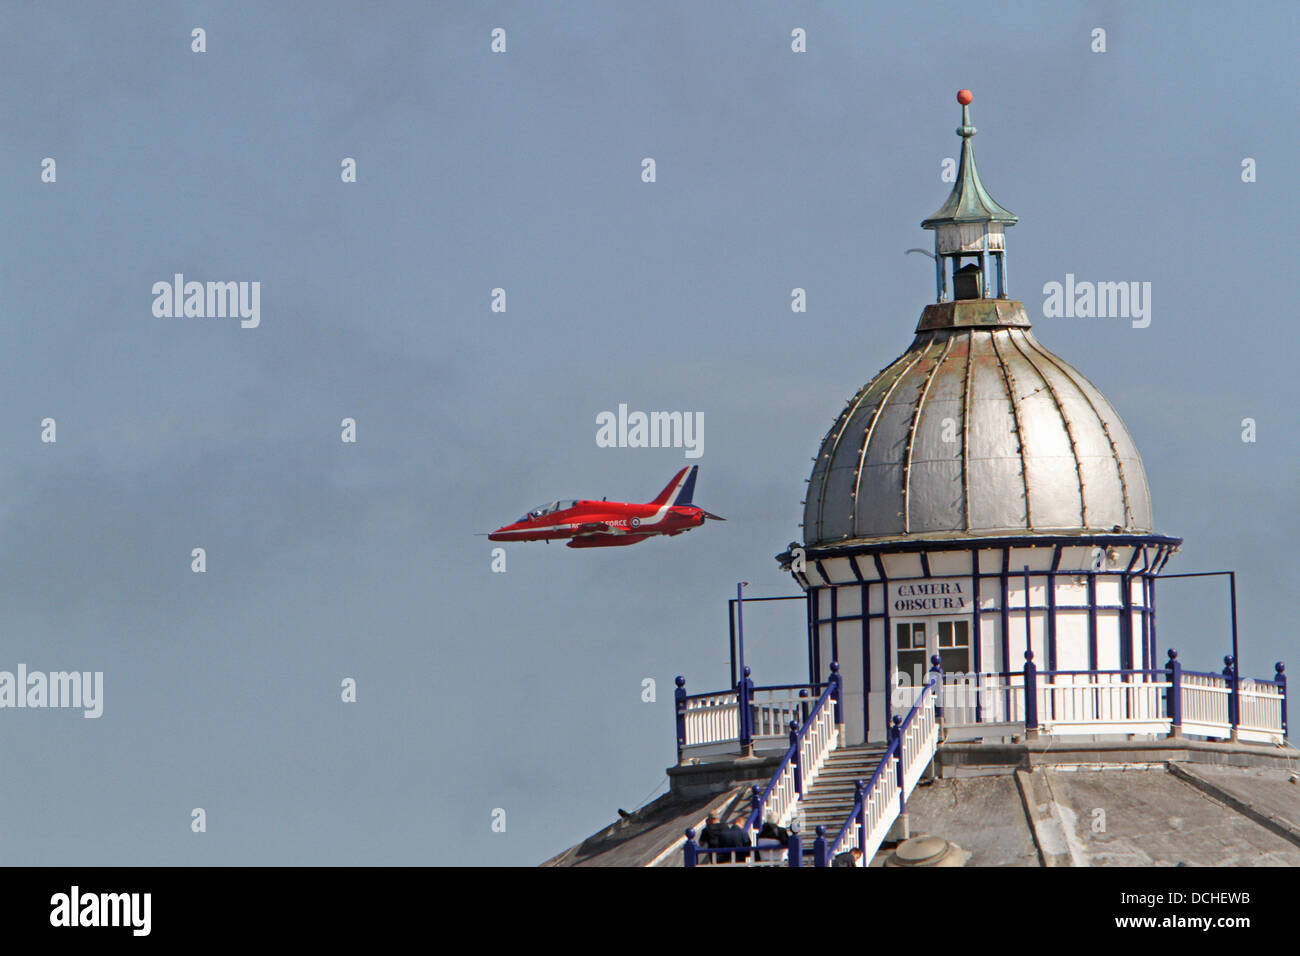 Eastbourne,UK,18th August 2013,A Red Arrow flies over the camera obscura on the pier during the Airbourne air display in Eastbourn Credit: Keith Larby/Alamy live News Stock Photo